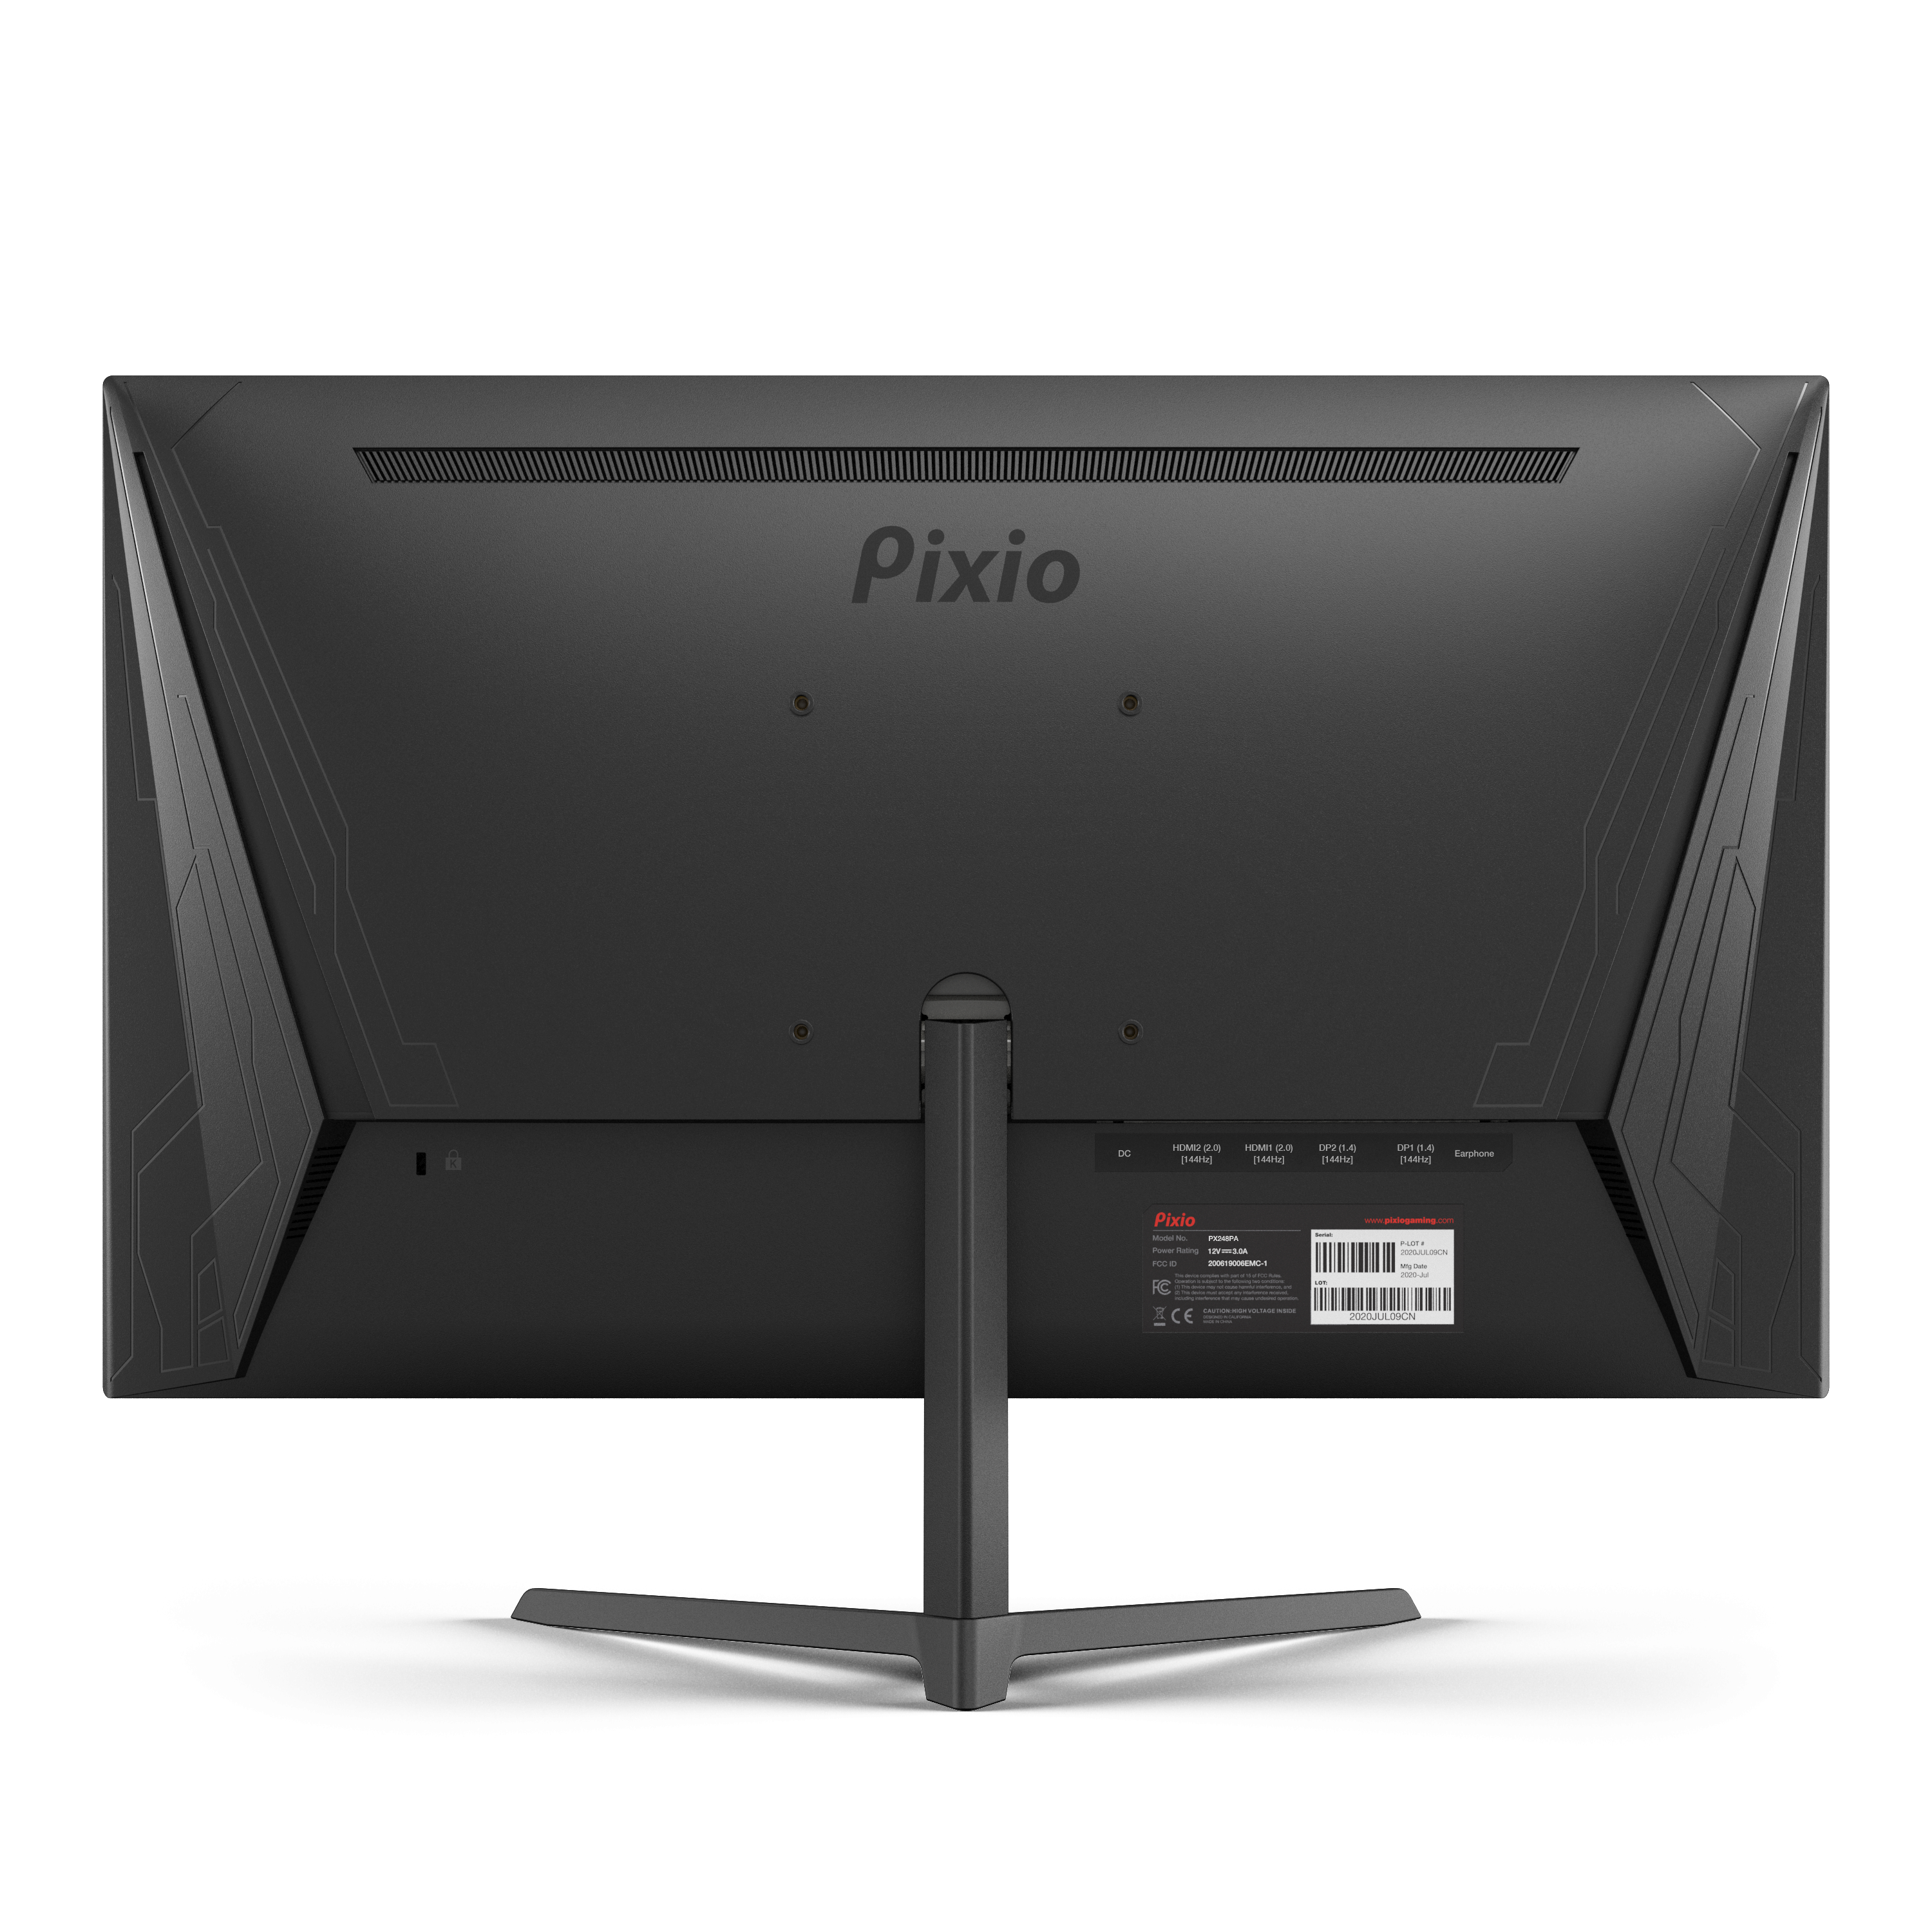 PX248 Prime Advanced Gaming Monitor